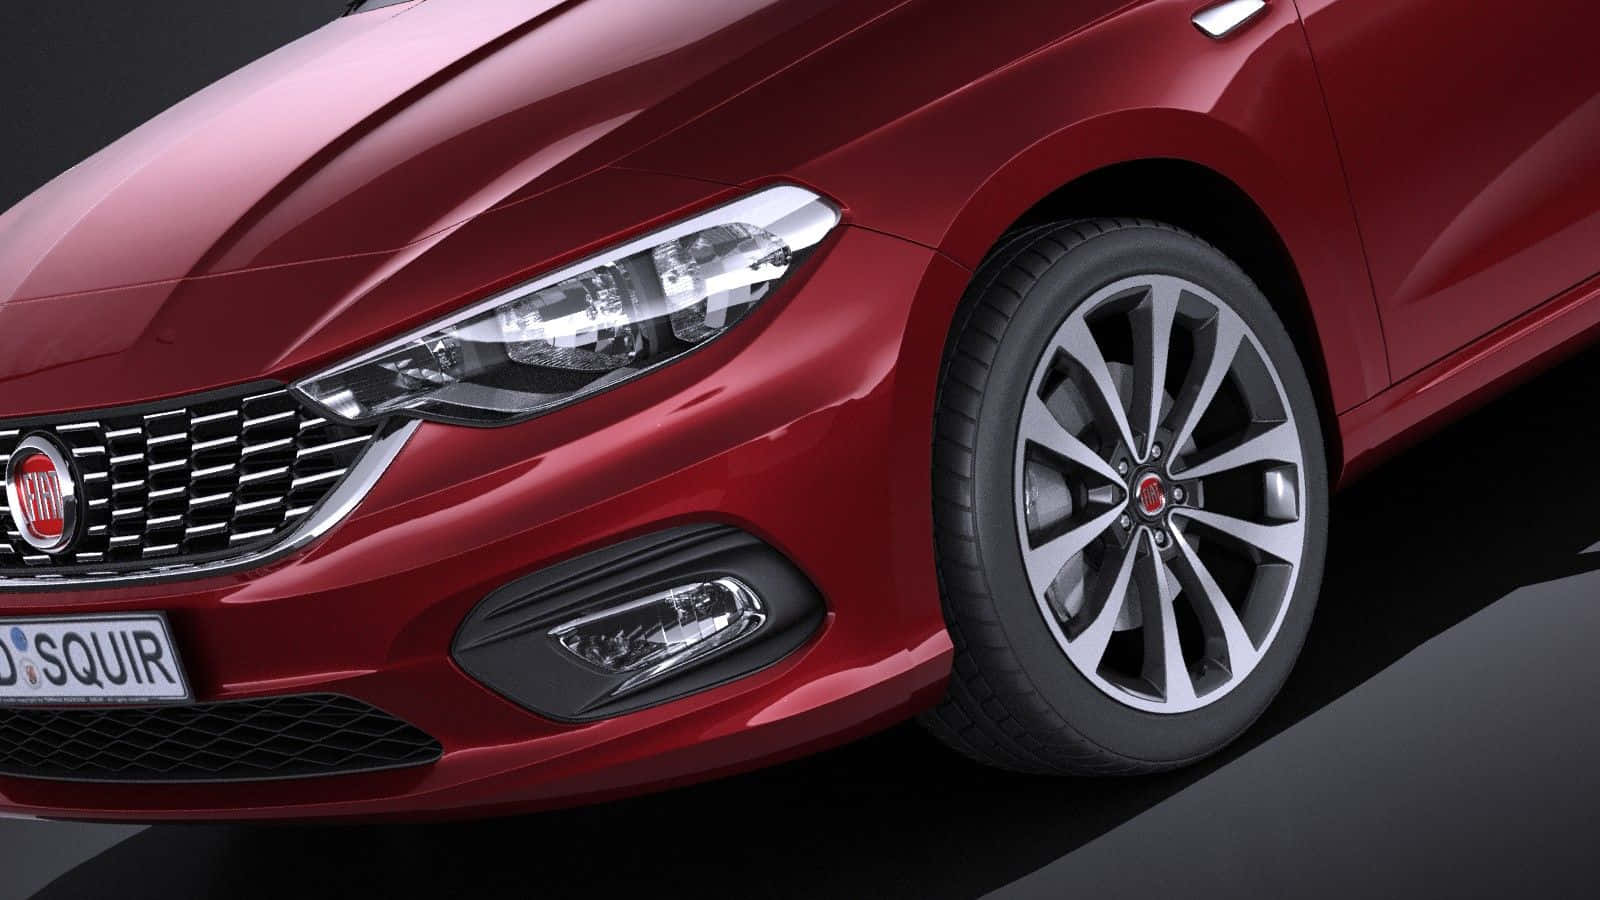 Stunning Fiat Tipo in Action Wallpaper